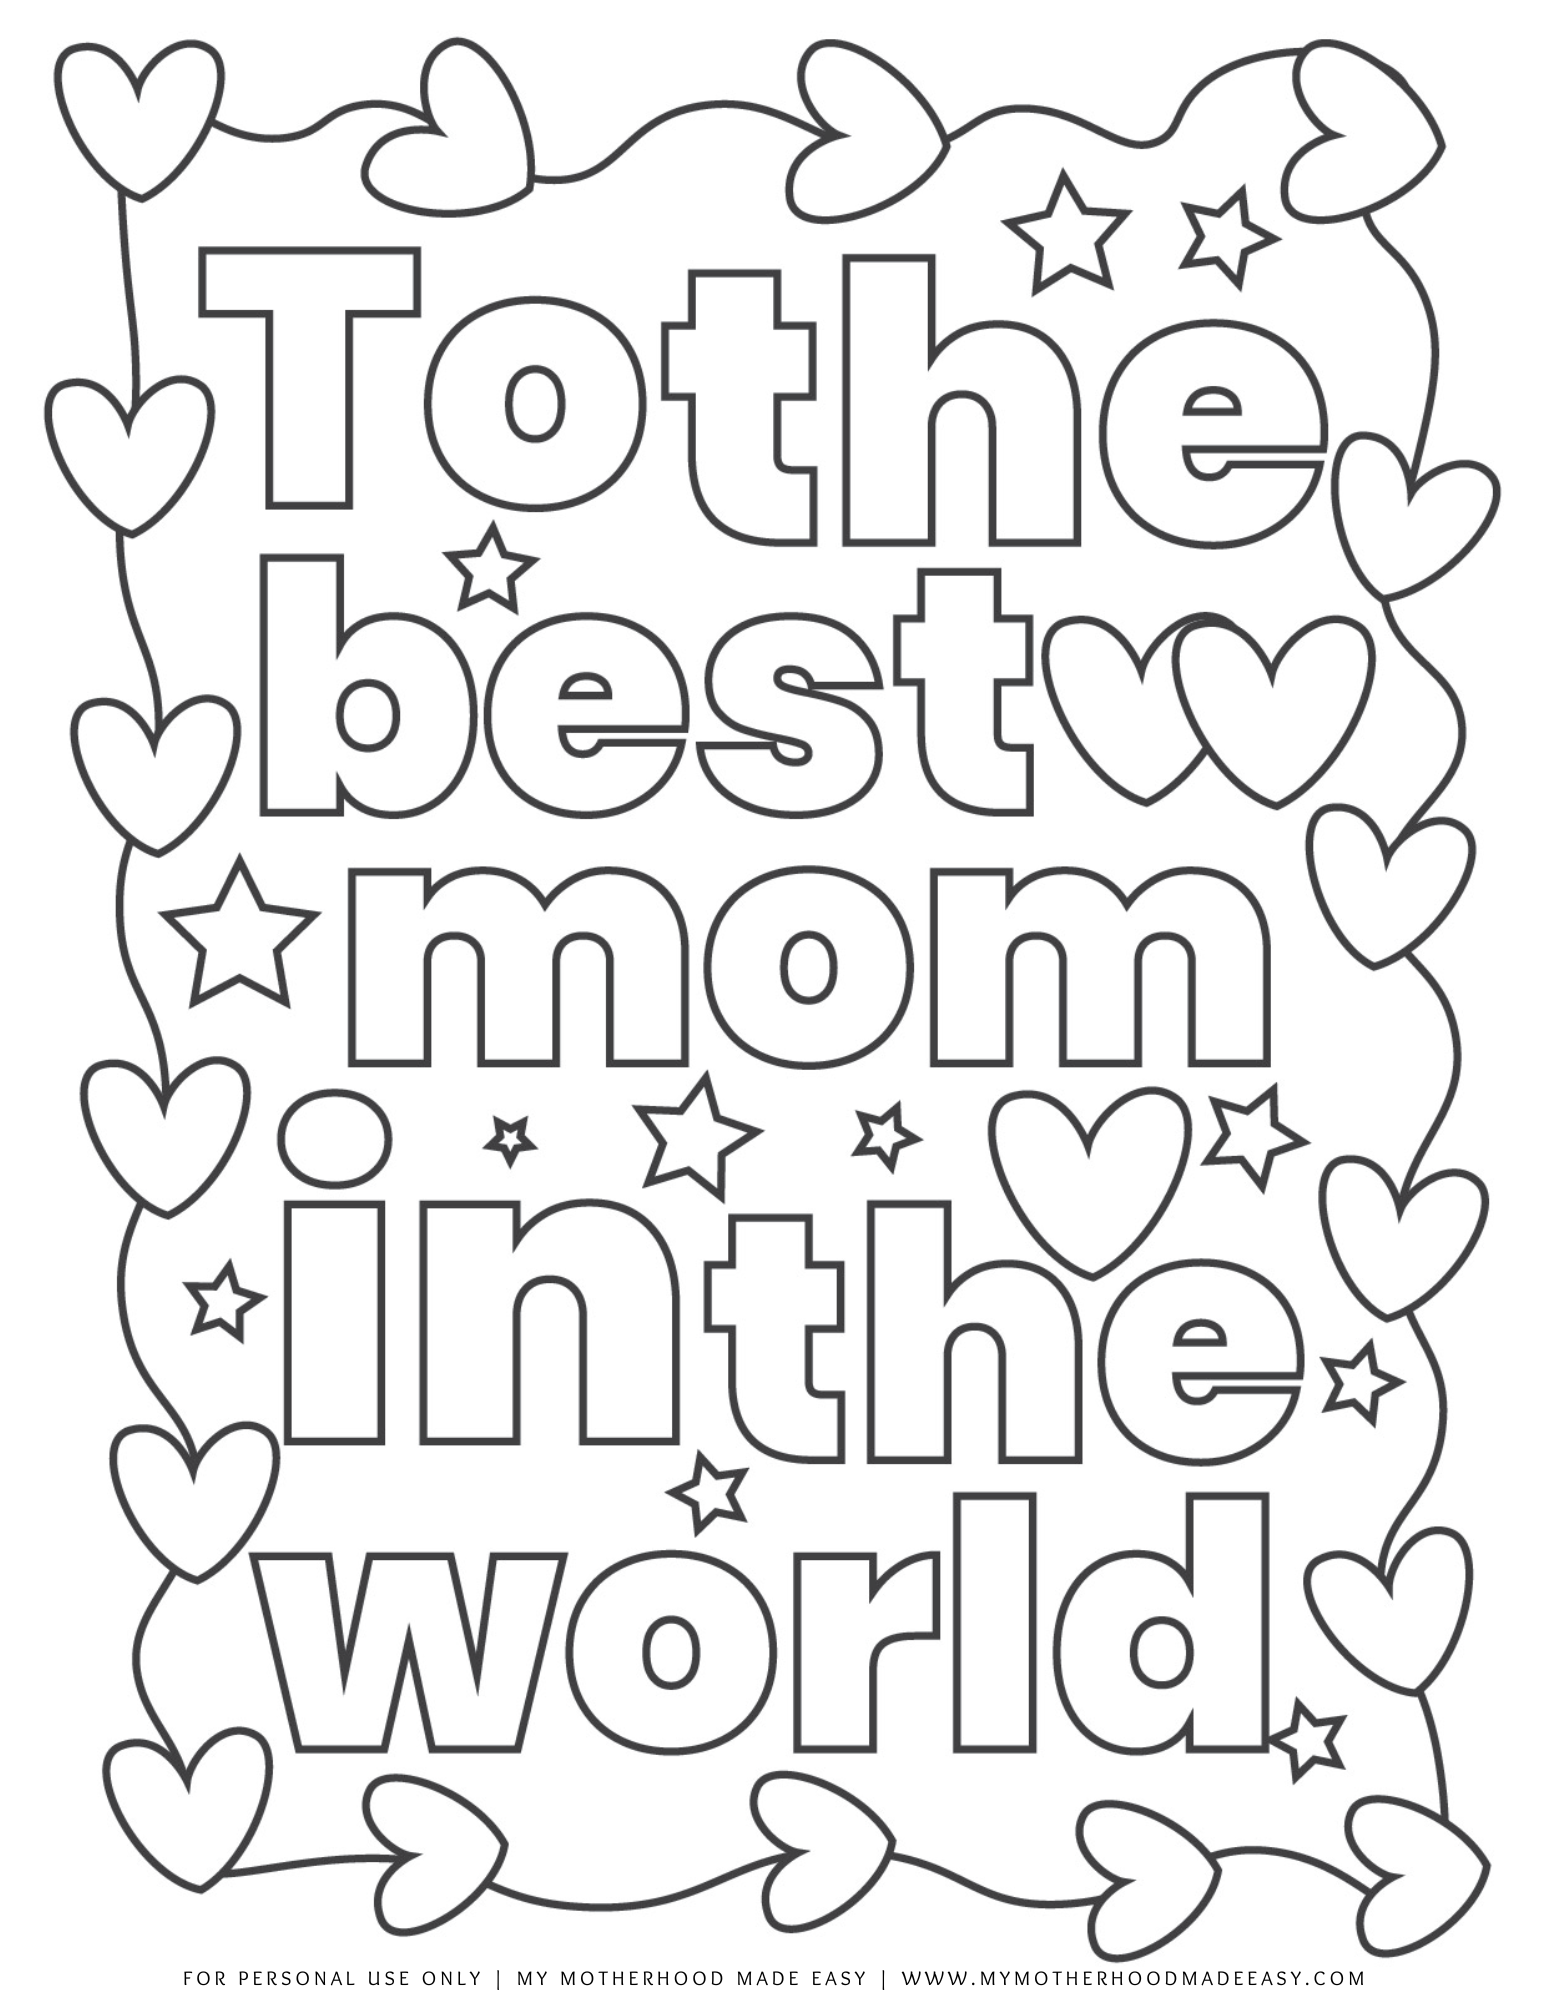 Heart Mothers day coloring pages